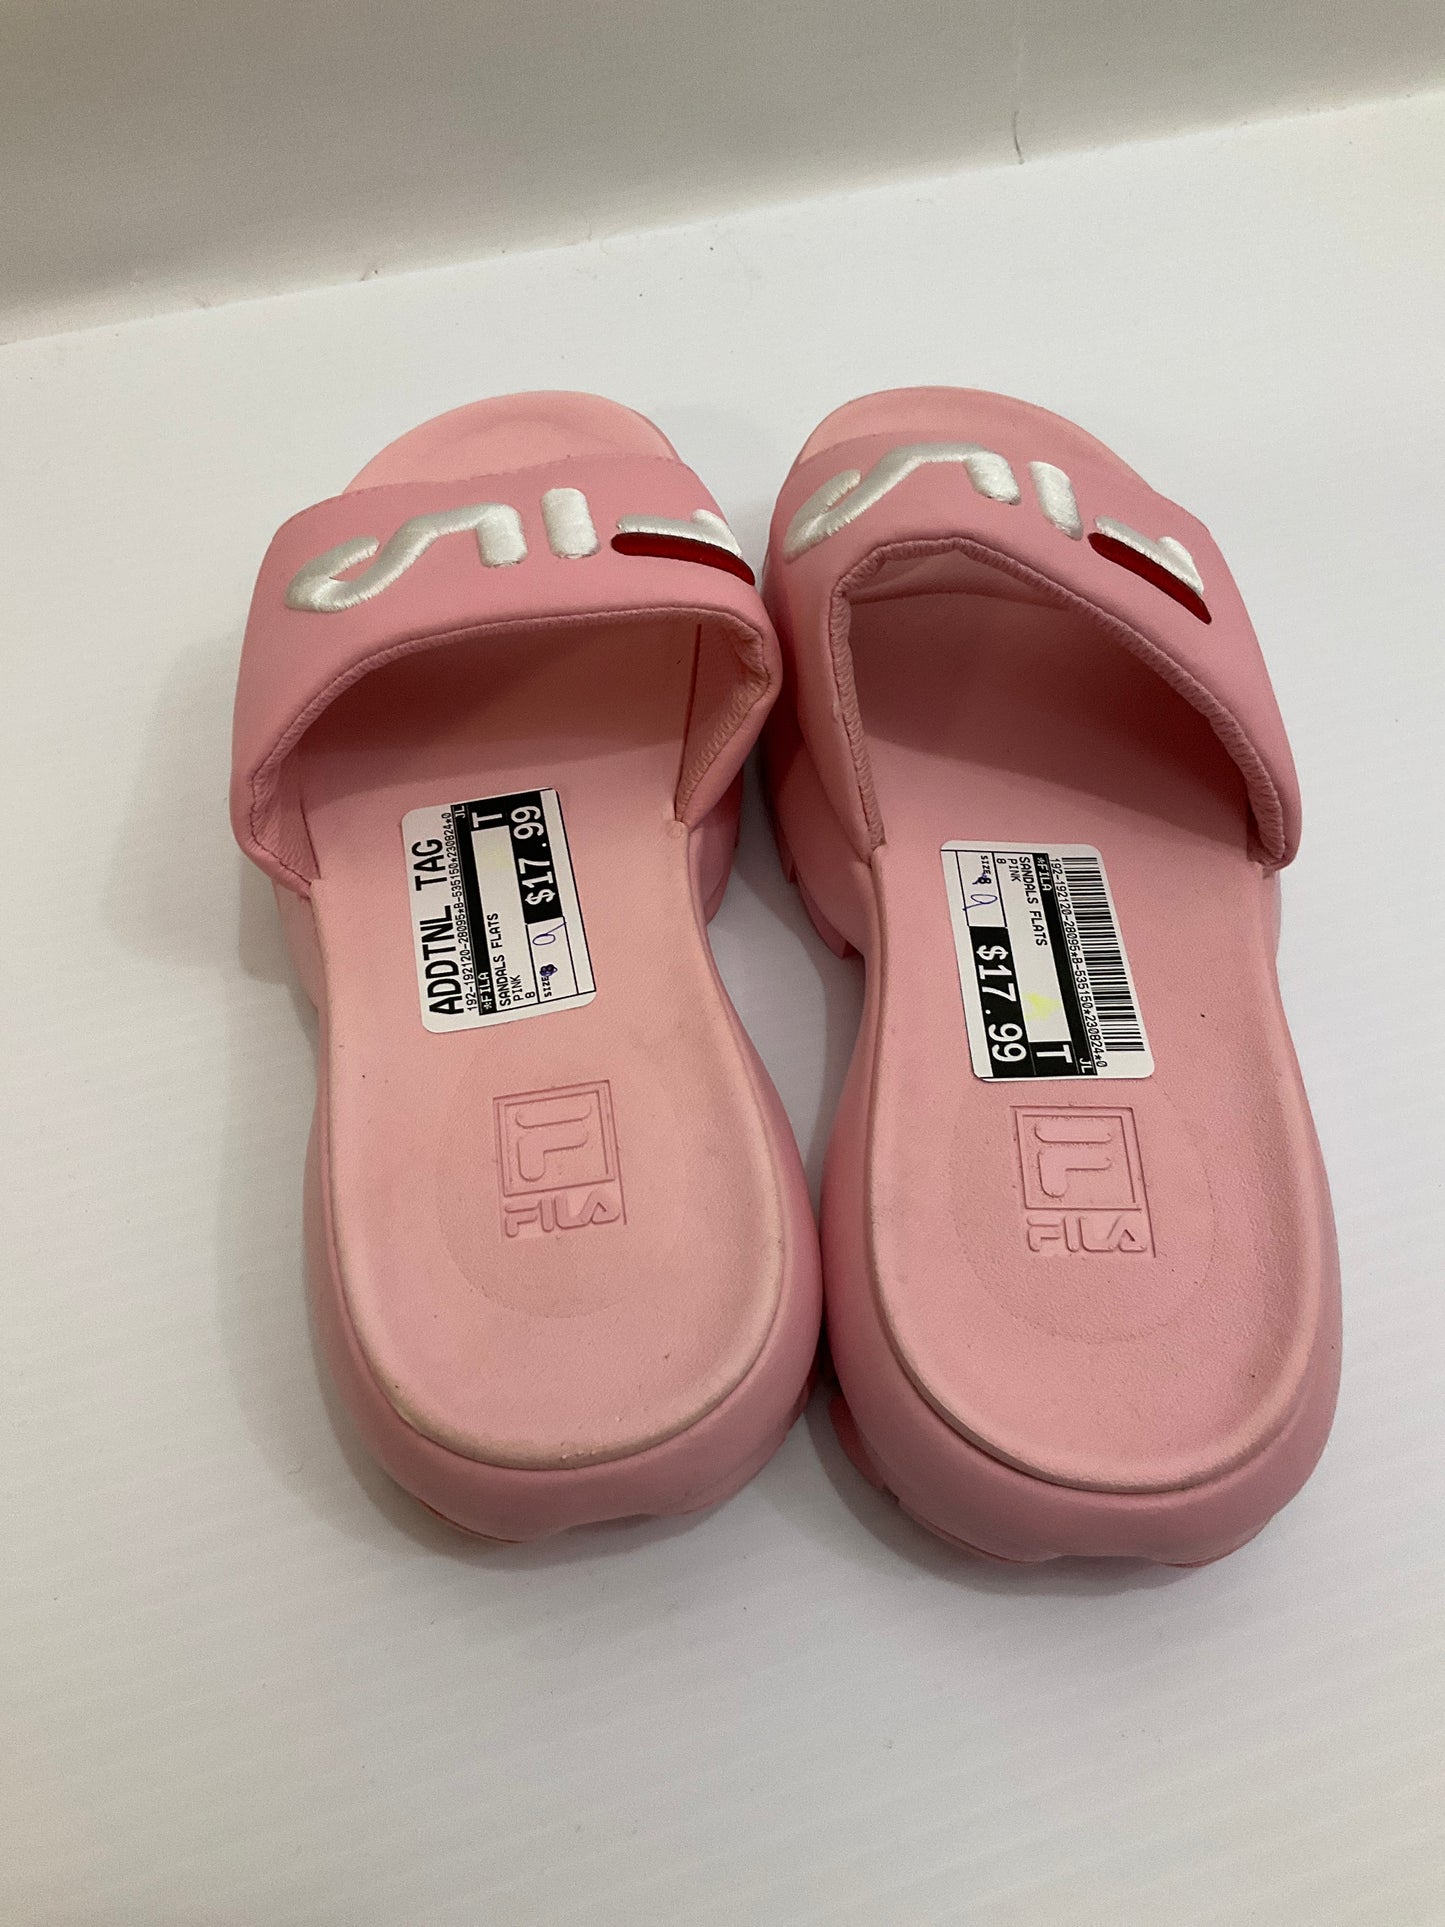 Sandals Flats By Fila  Size: 8